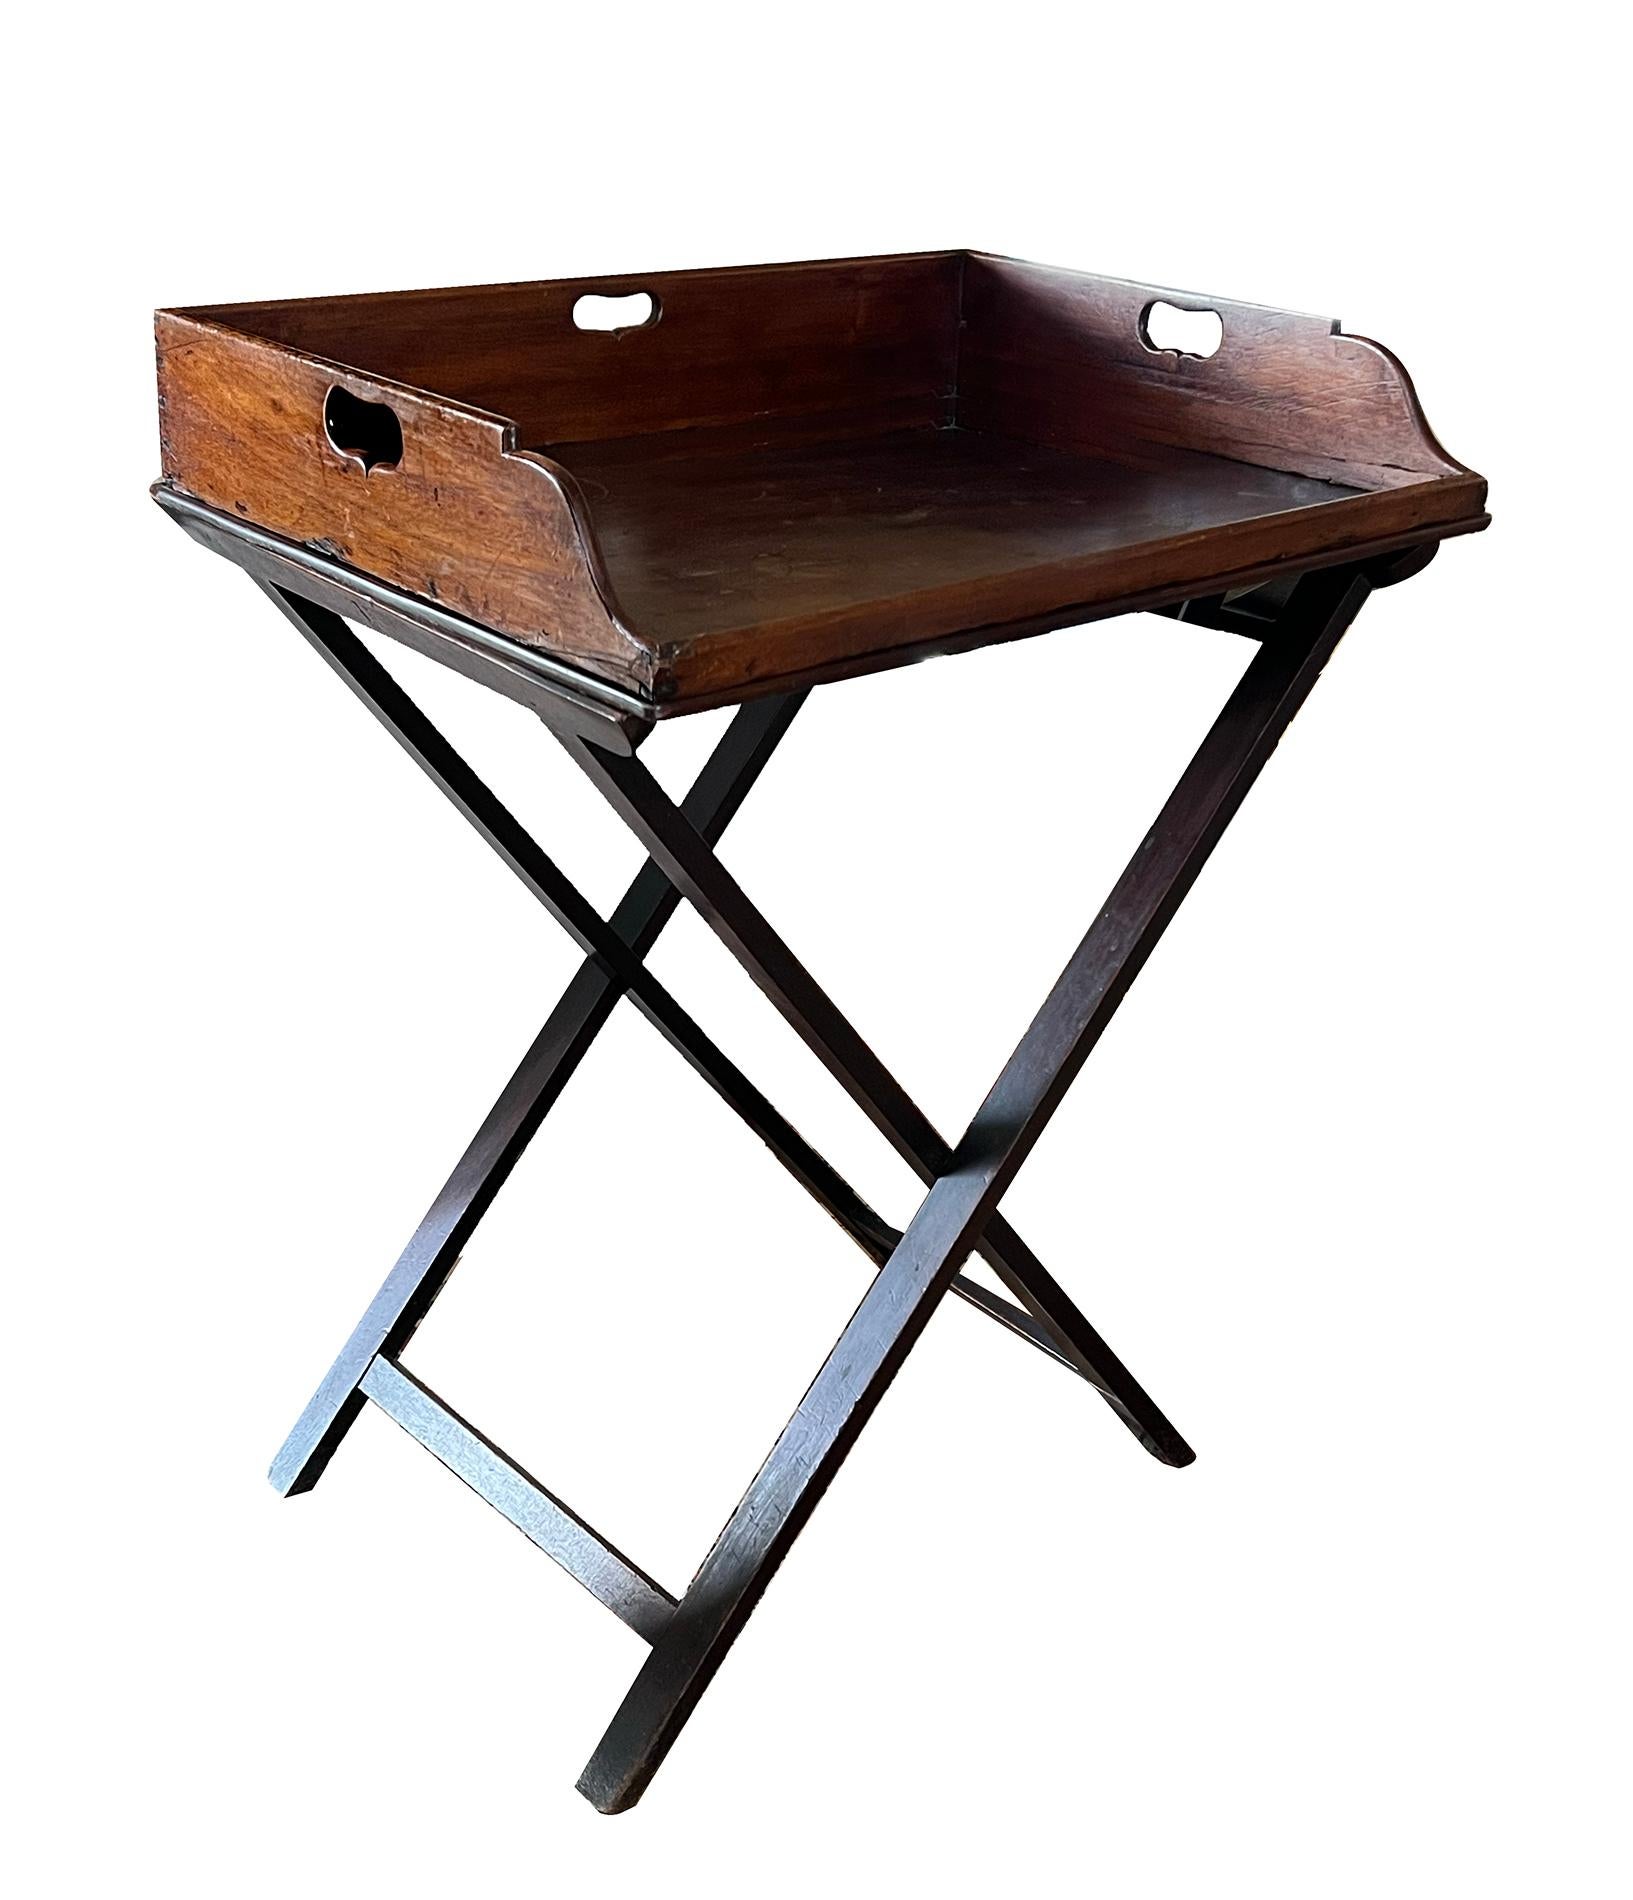 the rectangular tray with a deep gallery pierced with shaped handles; raised on a later collapsible x-frame stand; perfect design for a bar stand